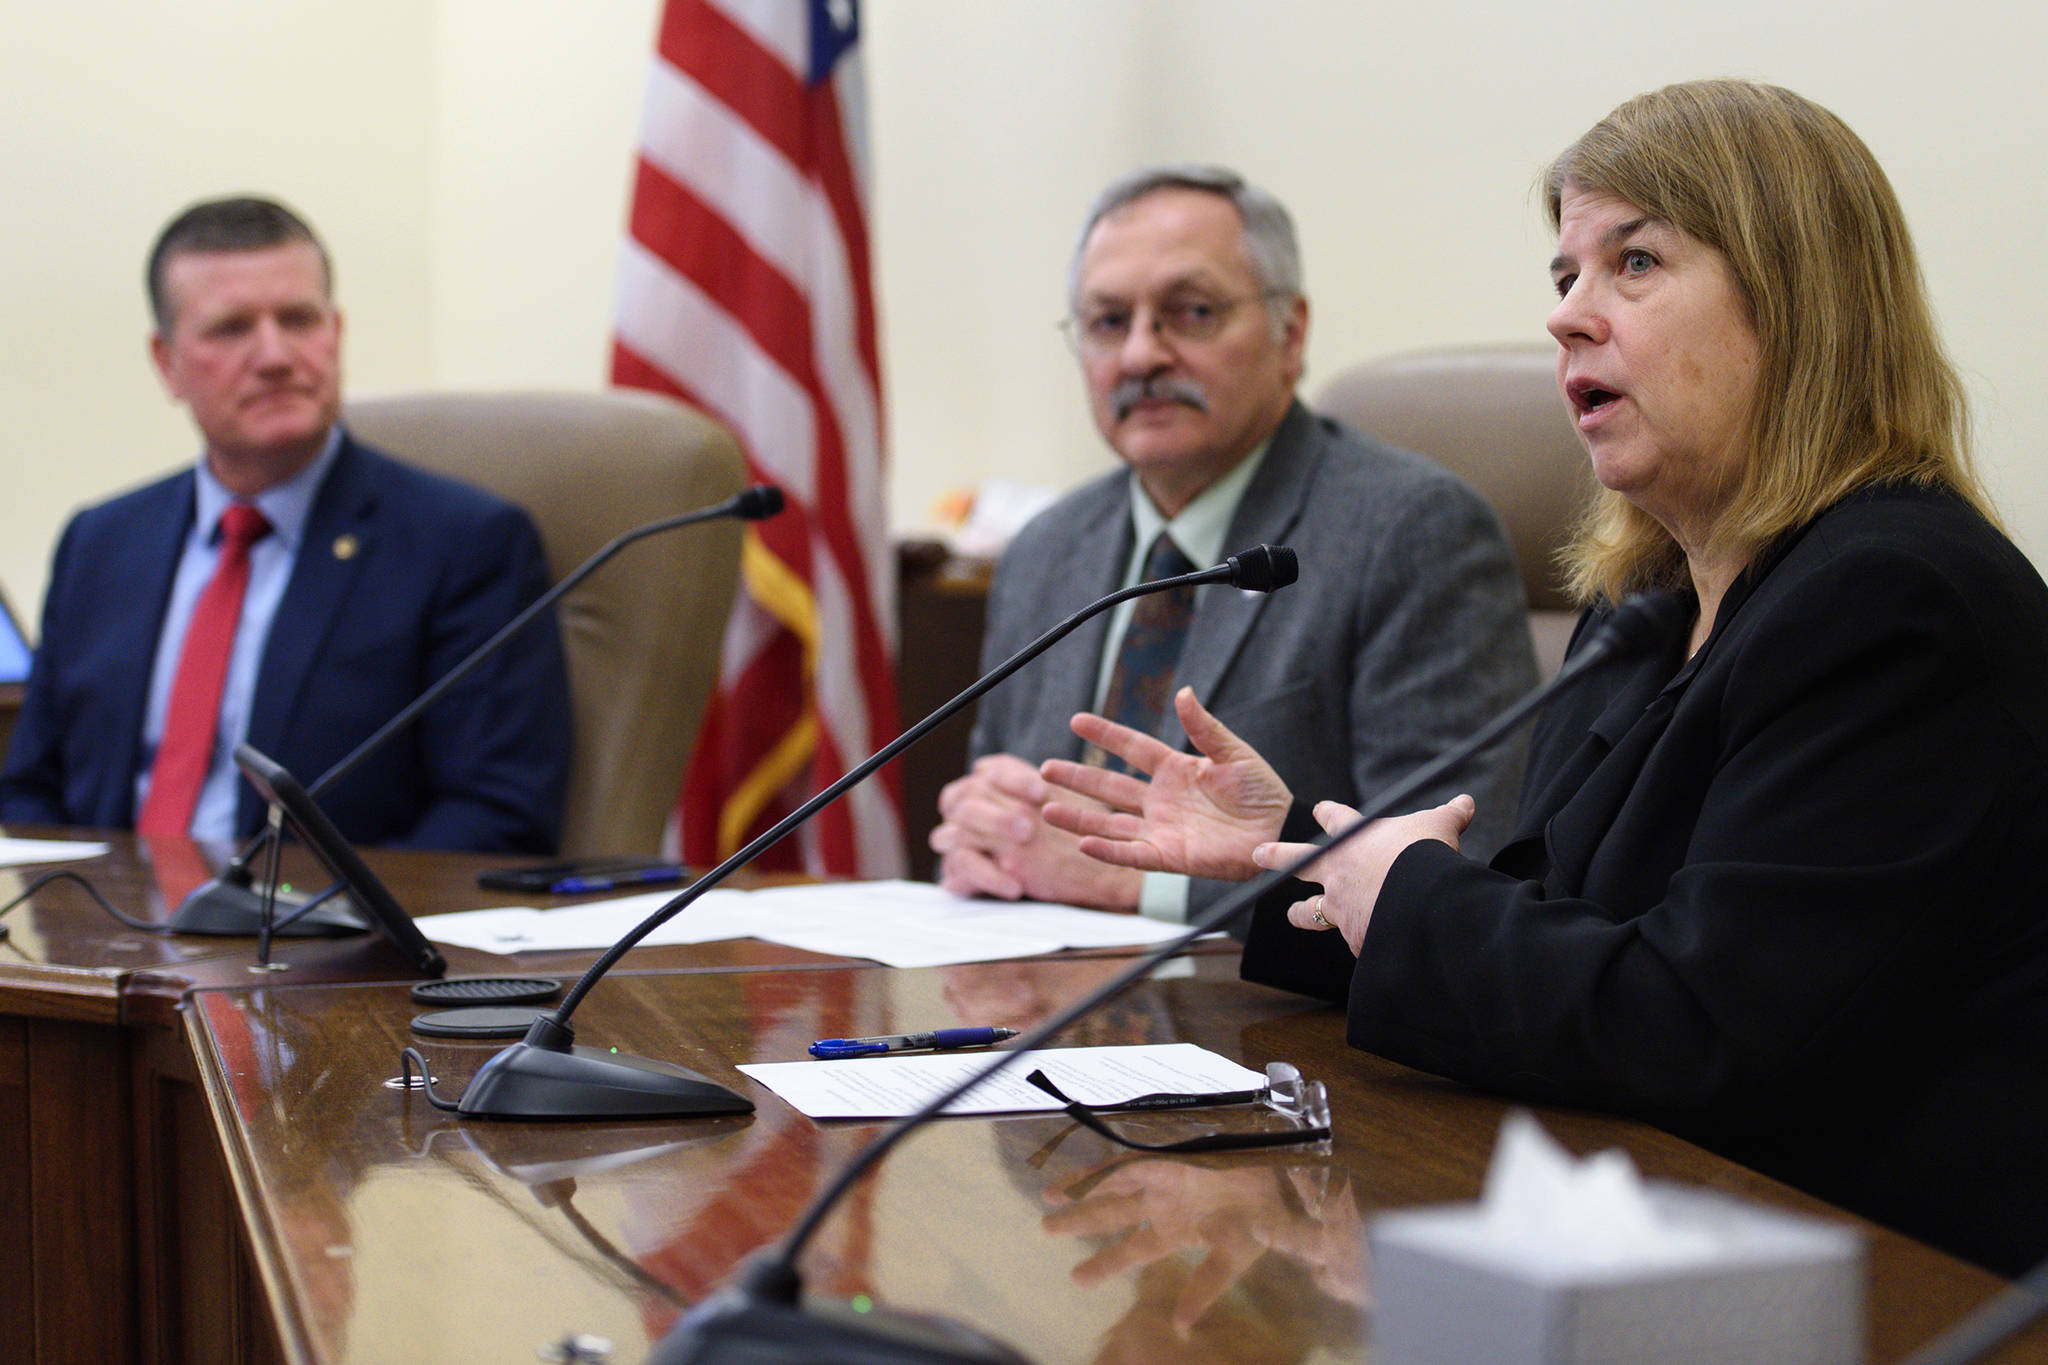 Rep. Tammie Wilson, R-North Pole, right, Rep. Dave Talerico, R-Healy, center, and Rep. Chuck Kopp, R-Anchorage, speak at a House Republican Caucus press conference at the Capitol on Monday, Jan. 21, 2019. (Michael Penn | Juneau Empire)